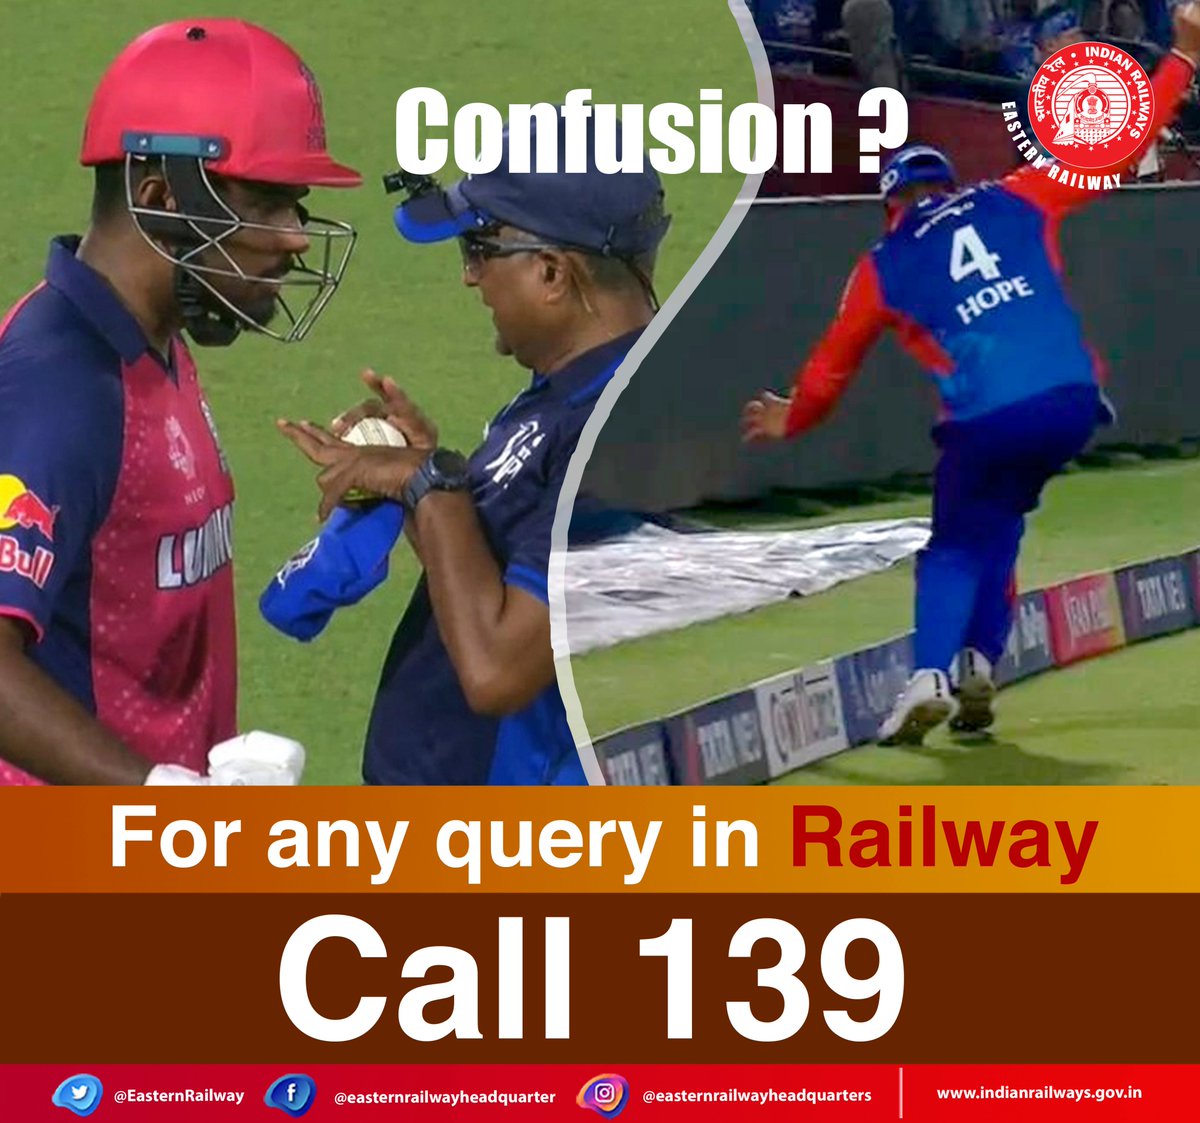 Dial RailMadad helpline number 139 to cater to all your queries